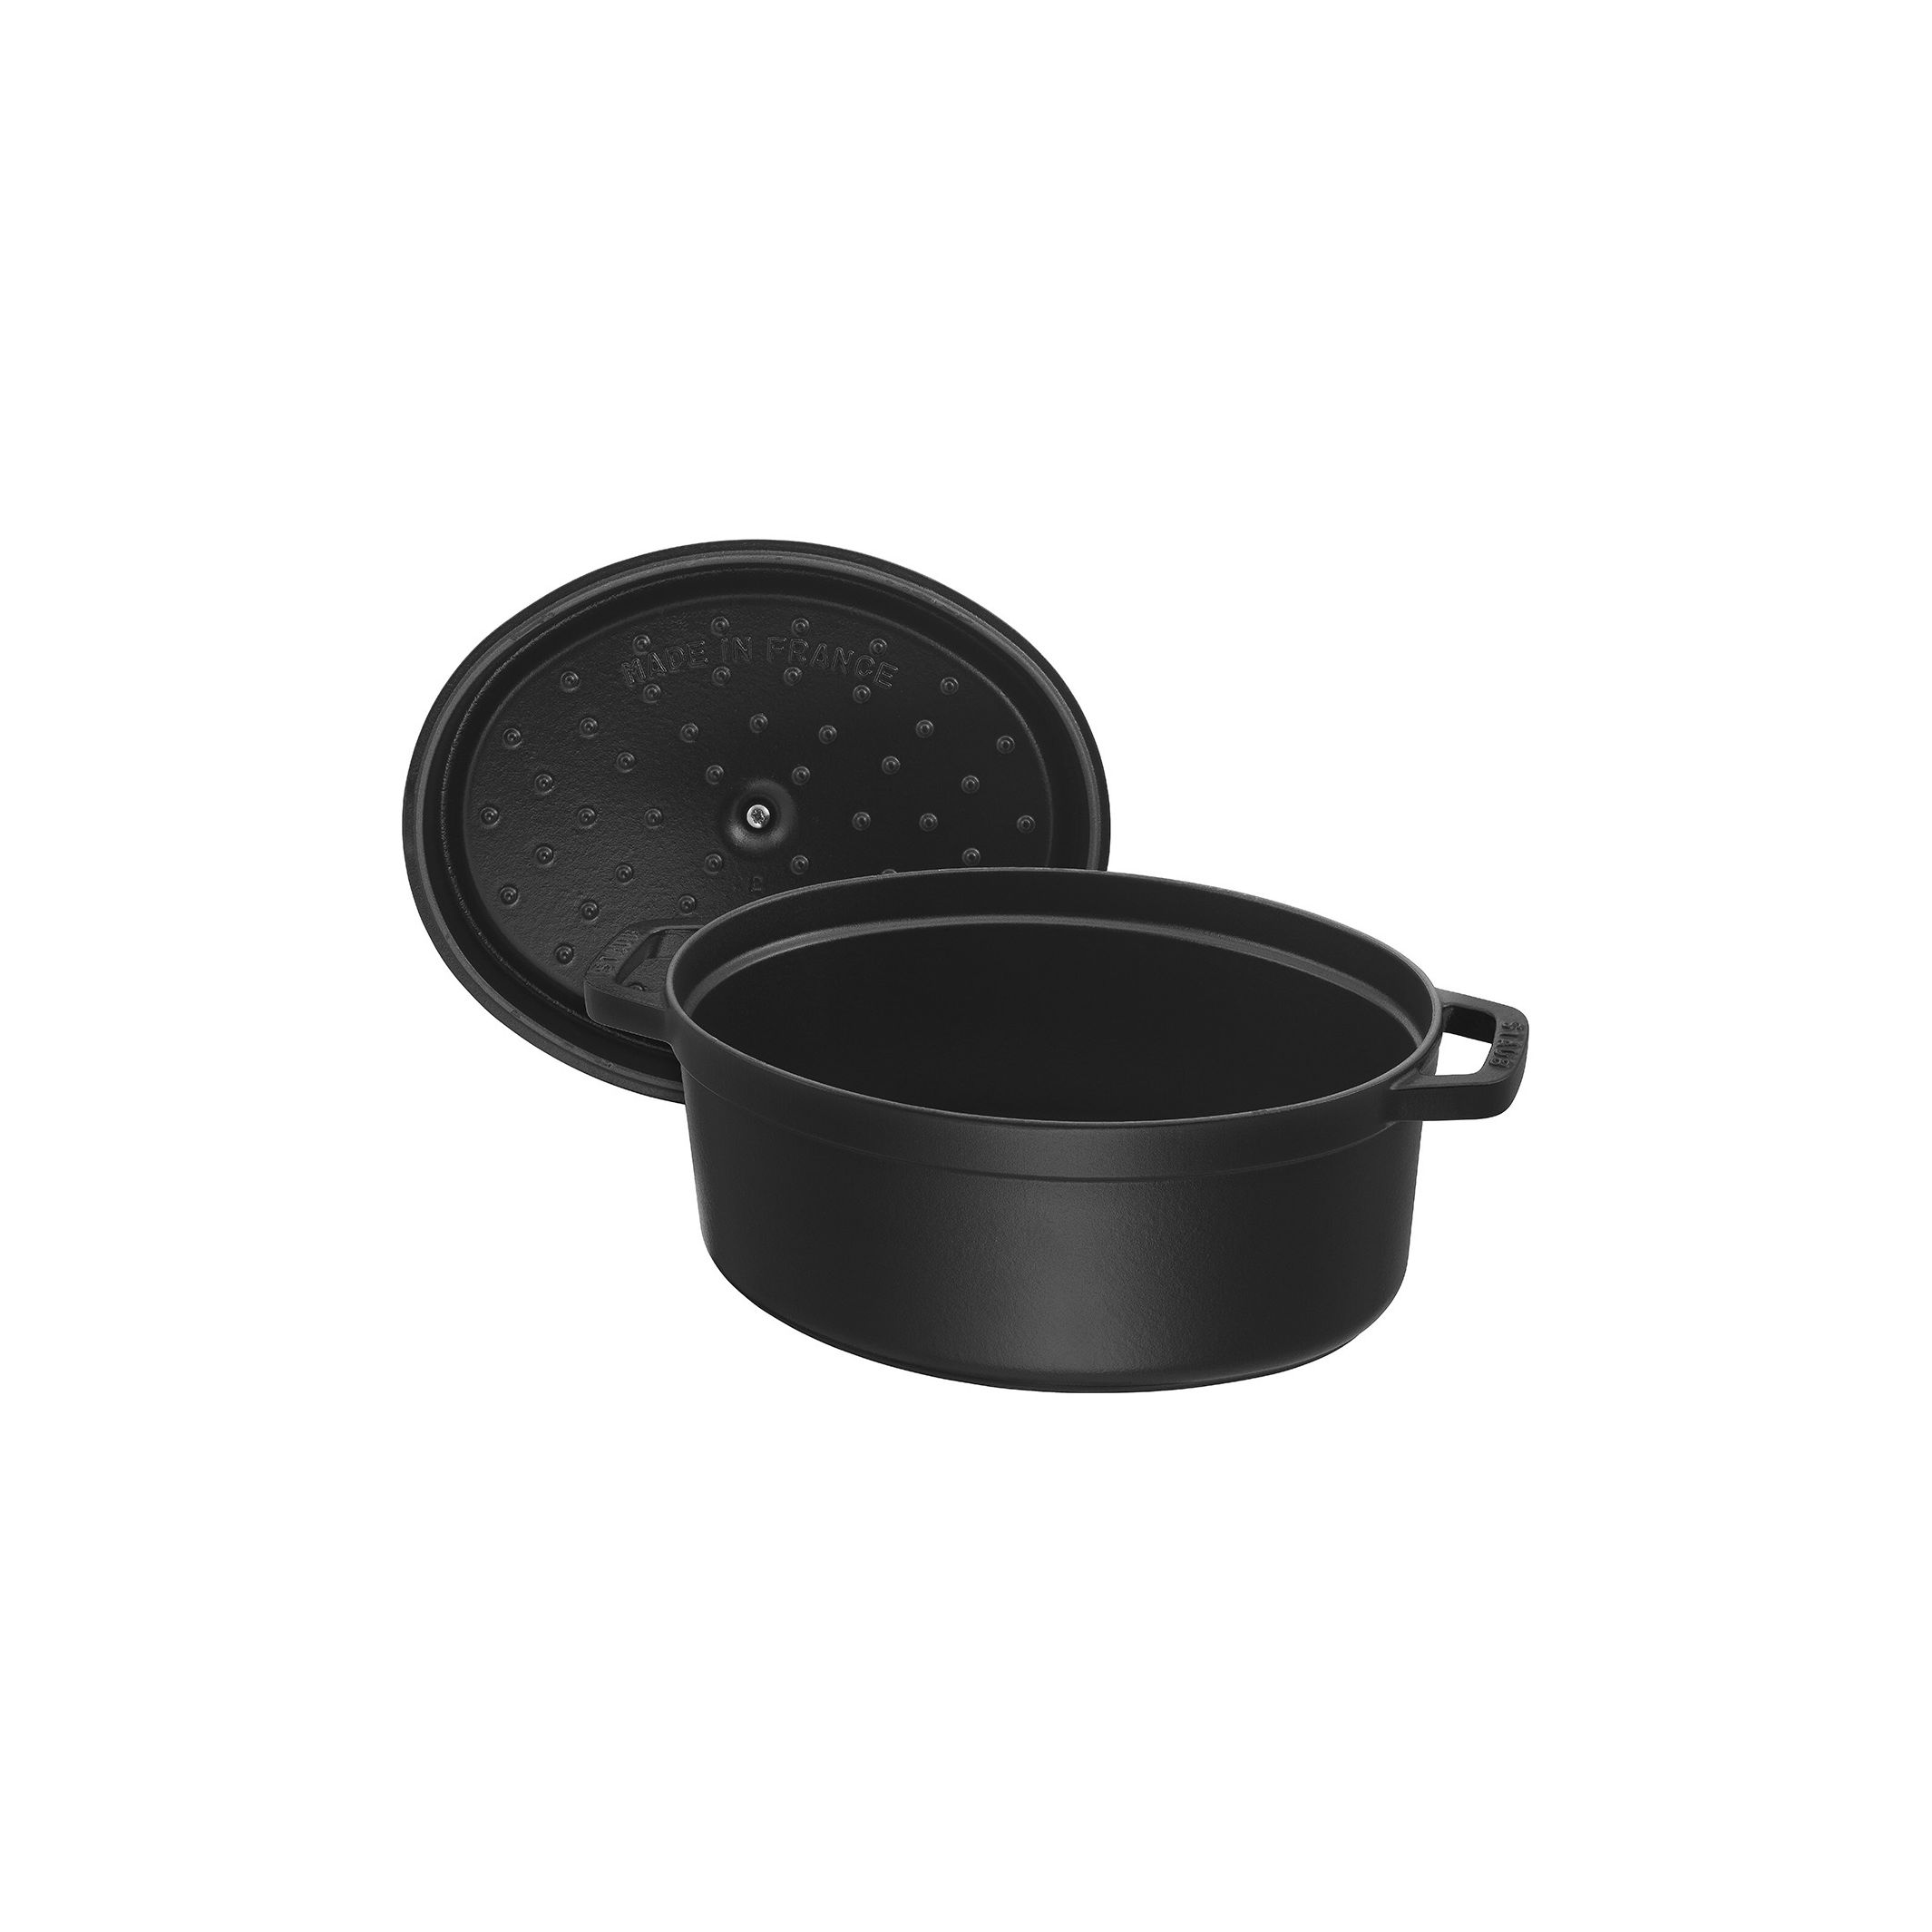 8 qt. Oval Non-Stick Cast Iron Dutch Oven in Black with Lid VS-ZTO-37-BK -  The Home Depot